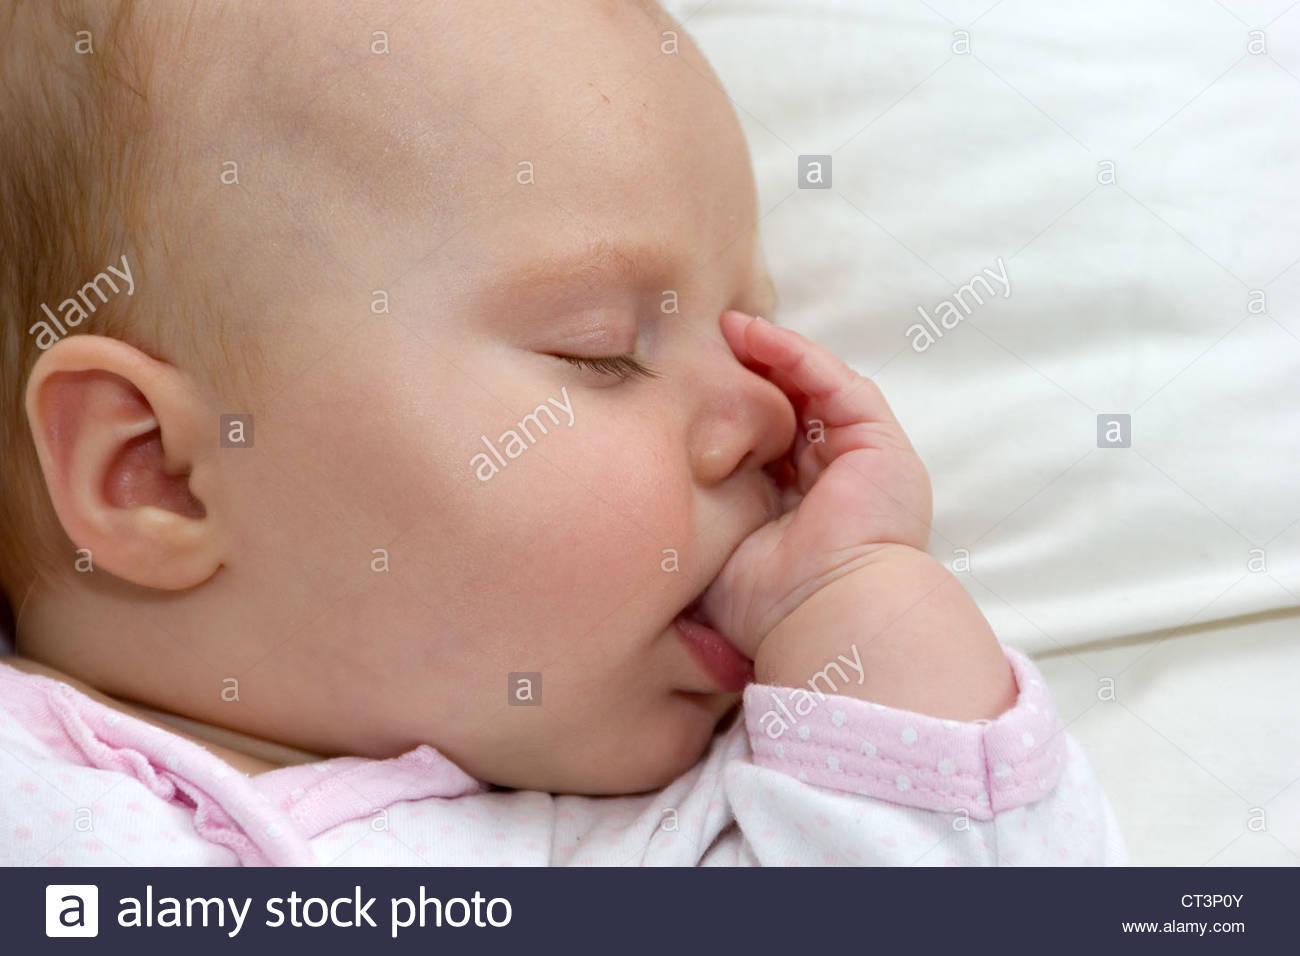 3-month-old-baby-asleep-on-a-pillow-sucking-her-thumb-CT3P0Y.jpg